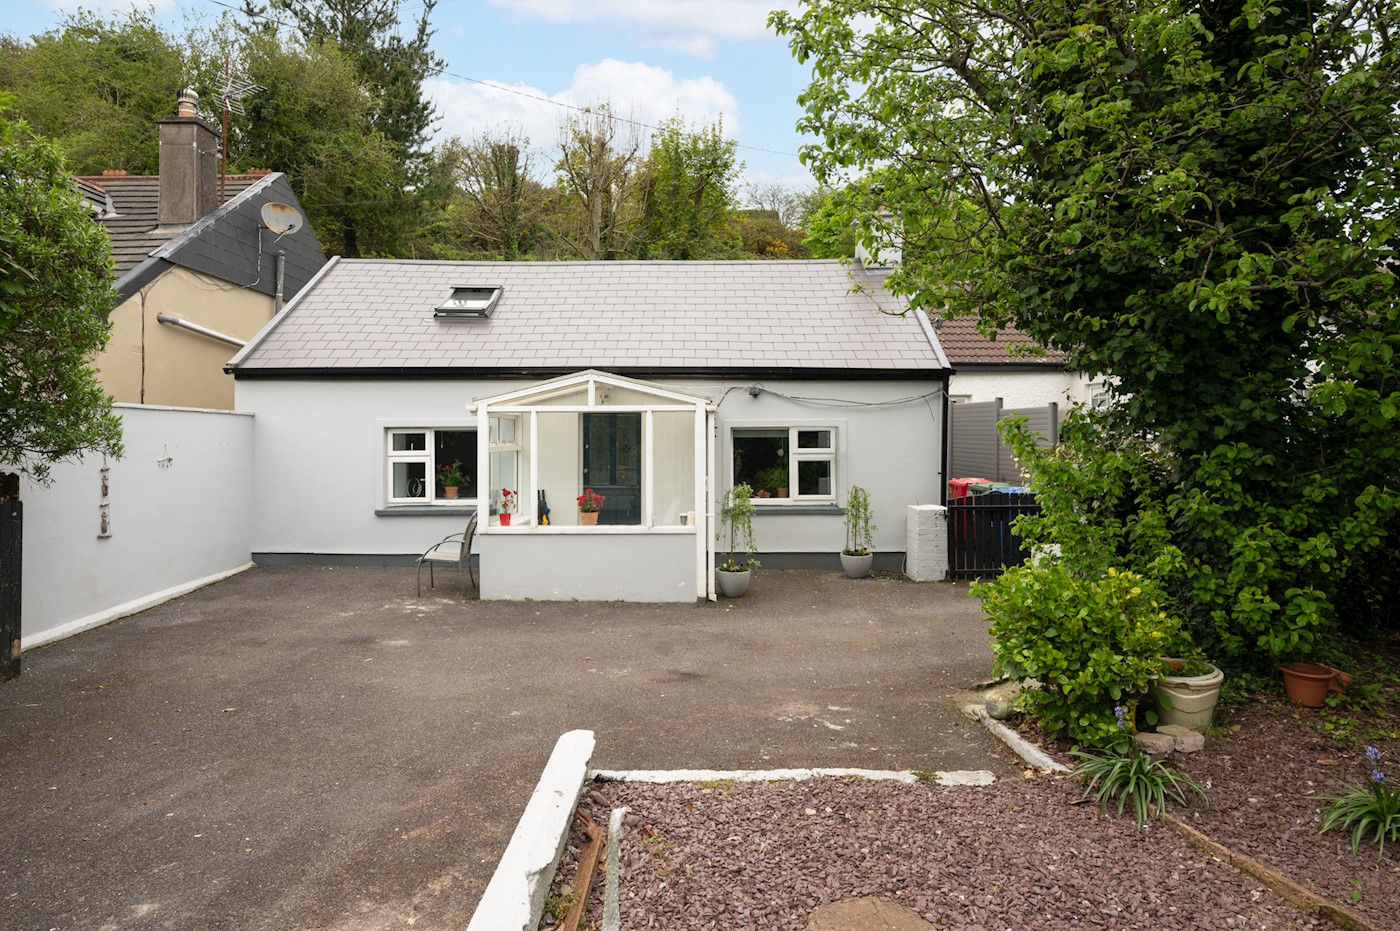 Strawhall, Monkstown, Co. Cork, T12DYH1 1/11